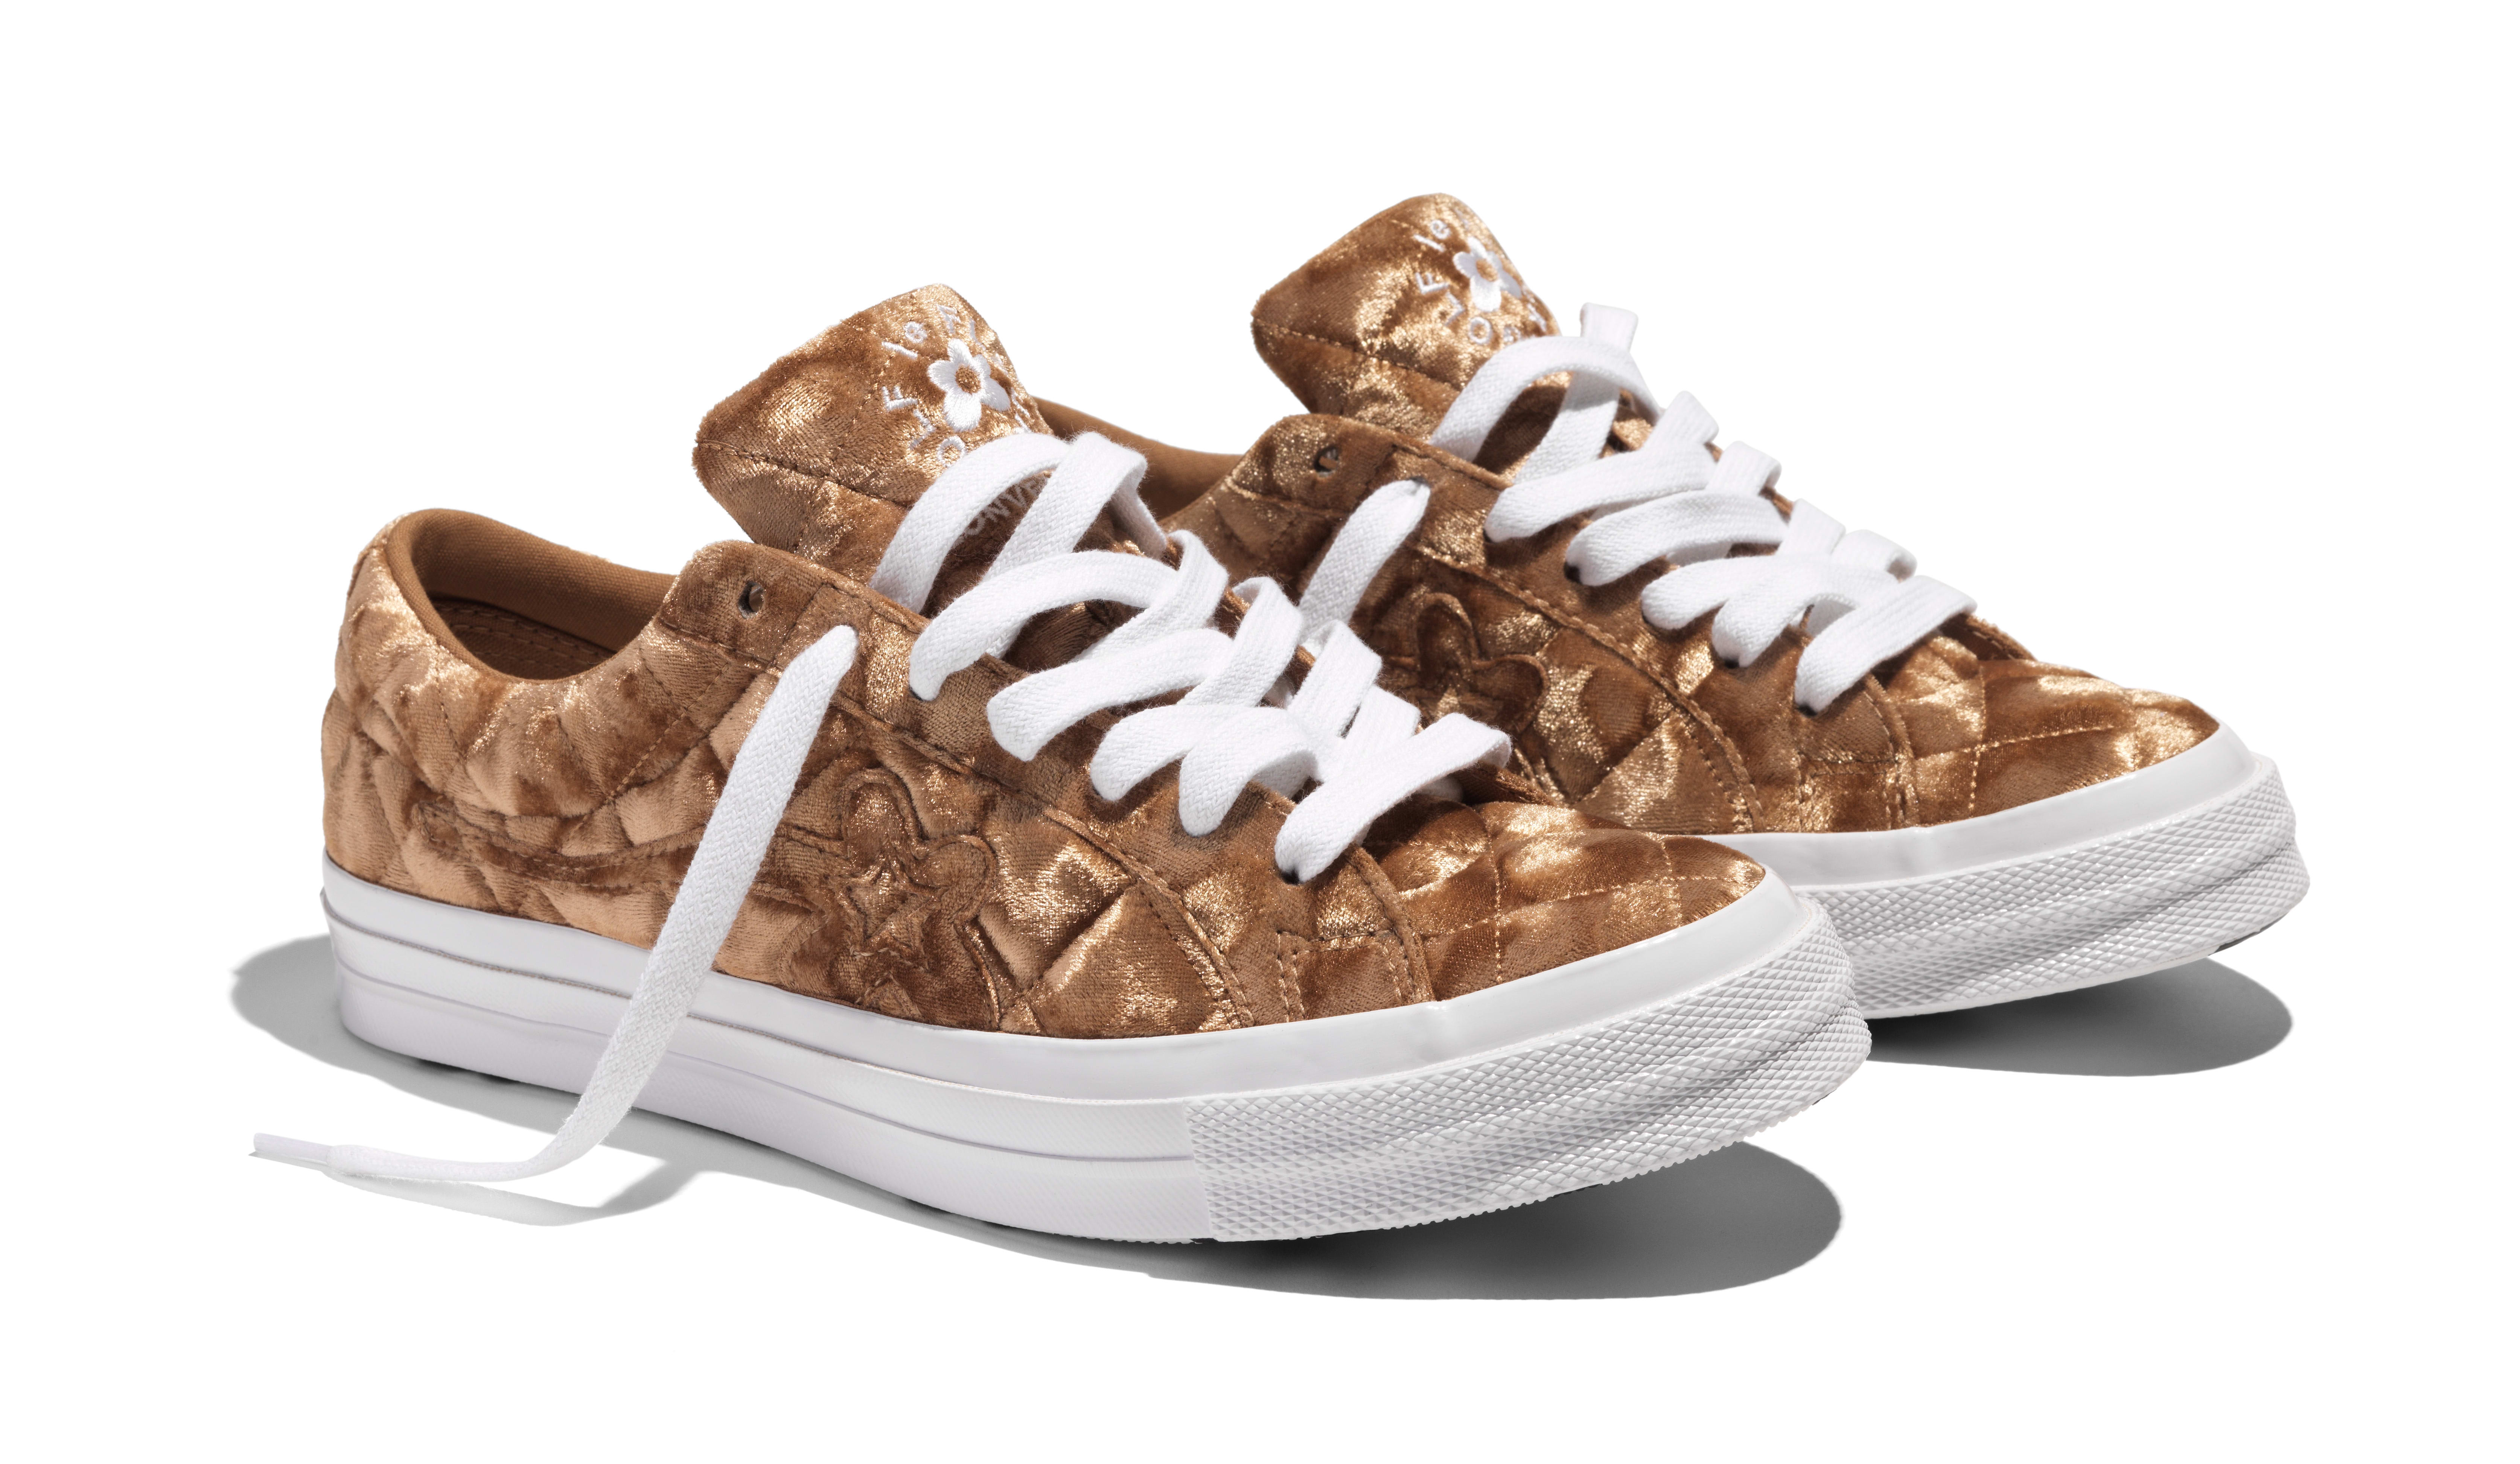 Tyler, the Creator x Converse Golf Le Fleur &#x27;Quilted Velvet/Brown&#x27;